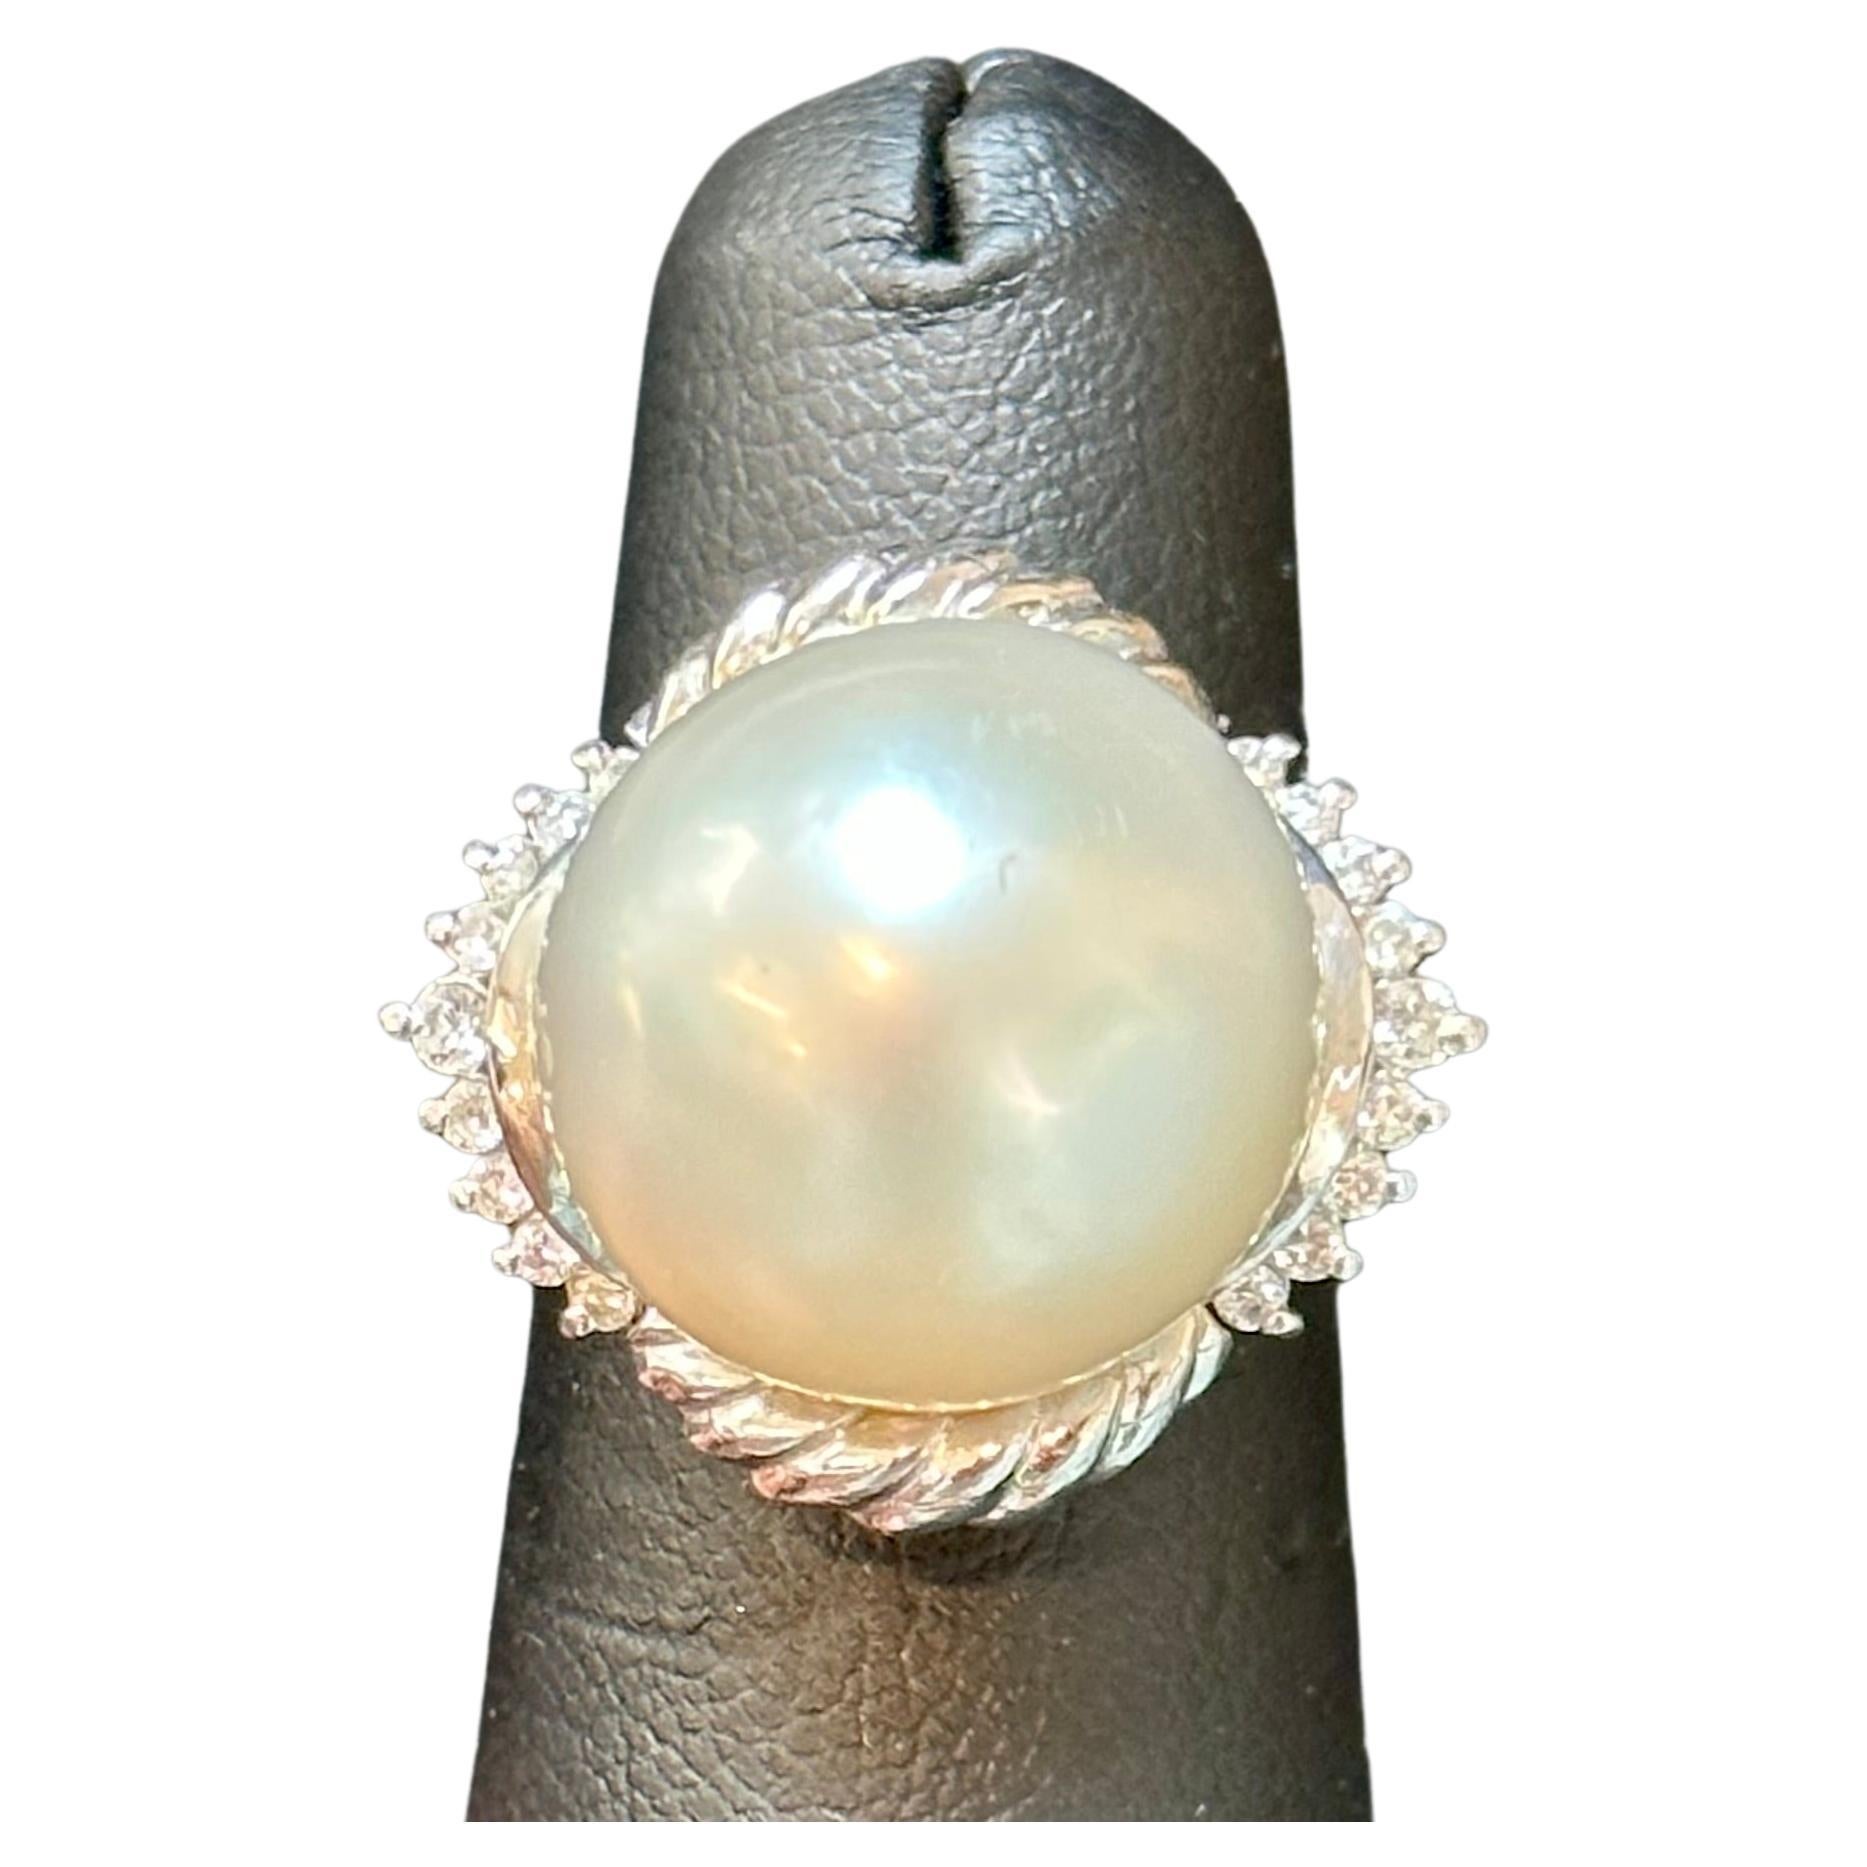 Introducing the magnificent 16mm South Sea Pearl Diamond Platinum Halo Sunburst Ring, showcasing timeless elegance. Crafted from platinum, this cocktail ring features a stunning 16mm South Sea cultured pearl as its centerpiece. The pearl boasts an